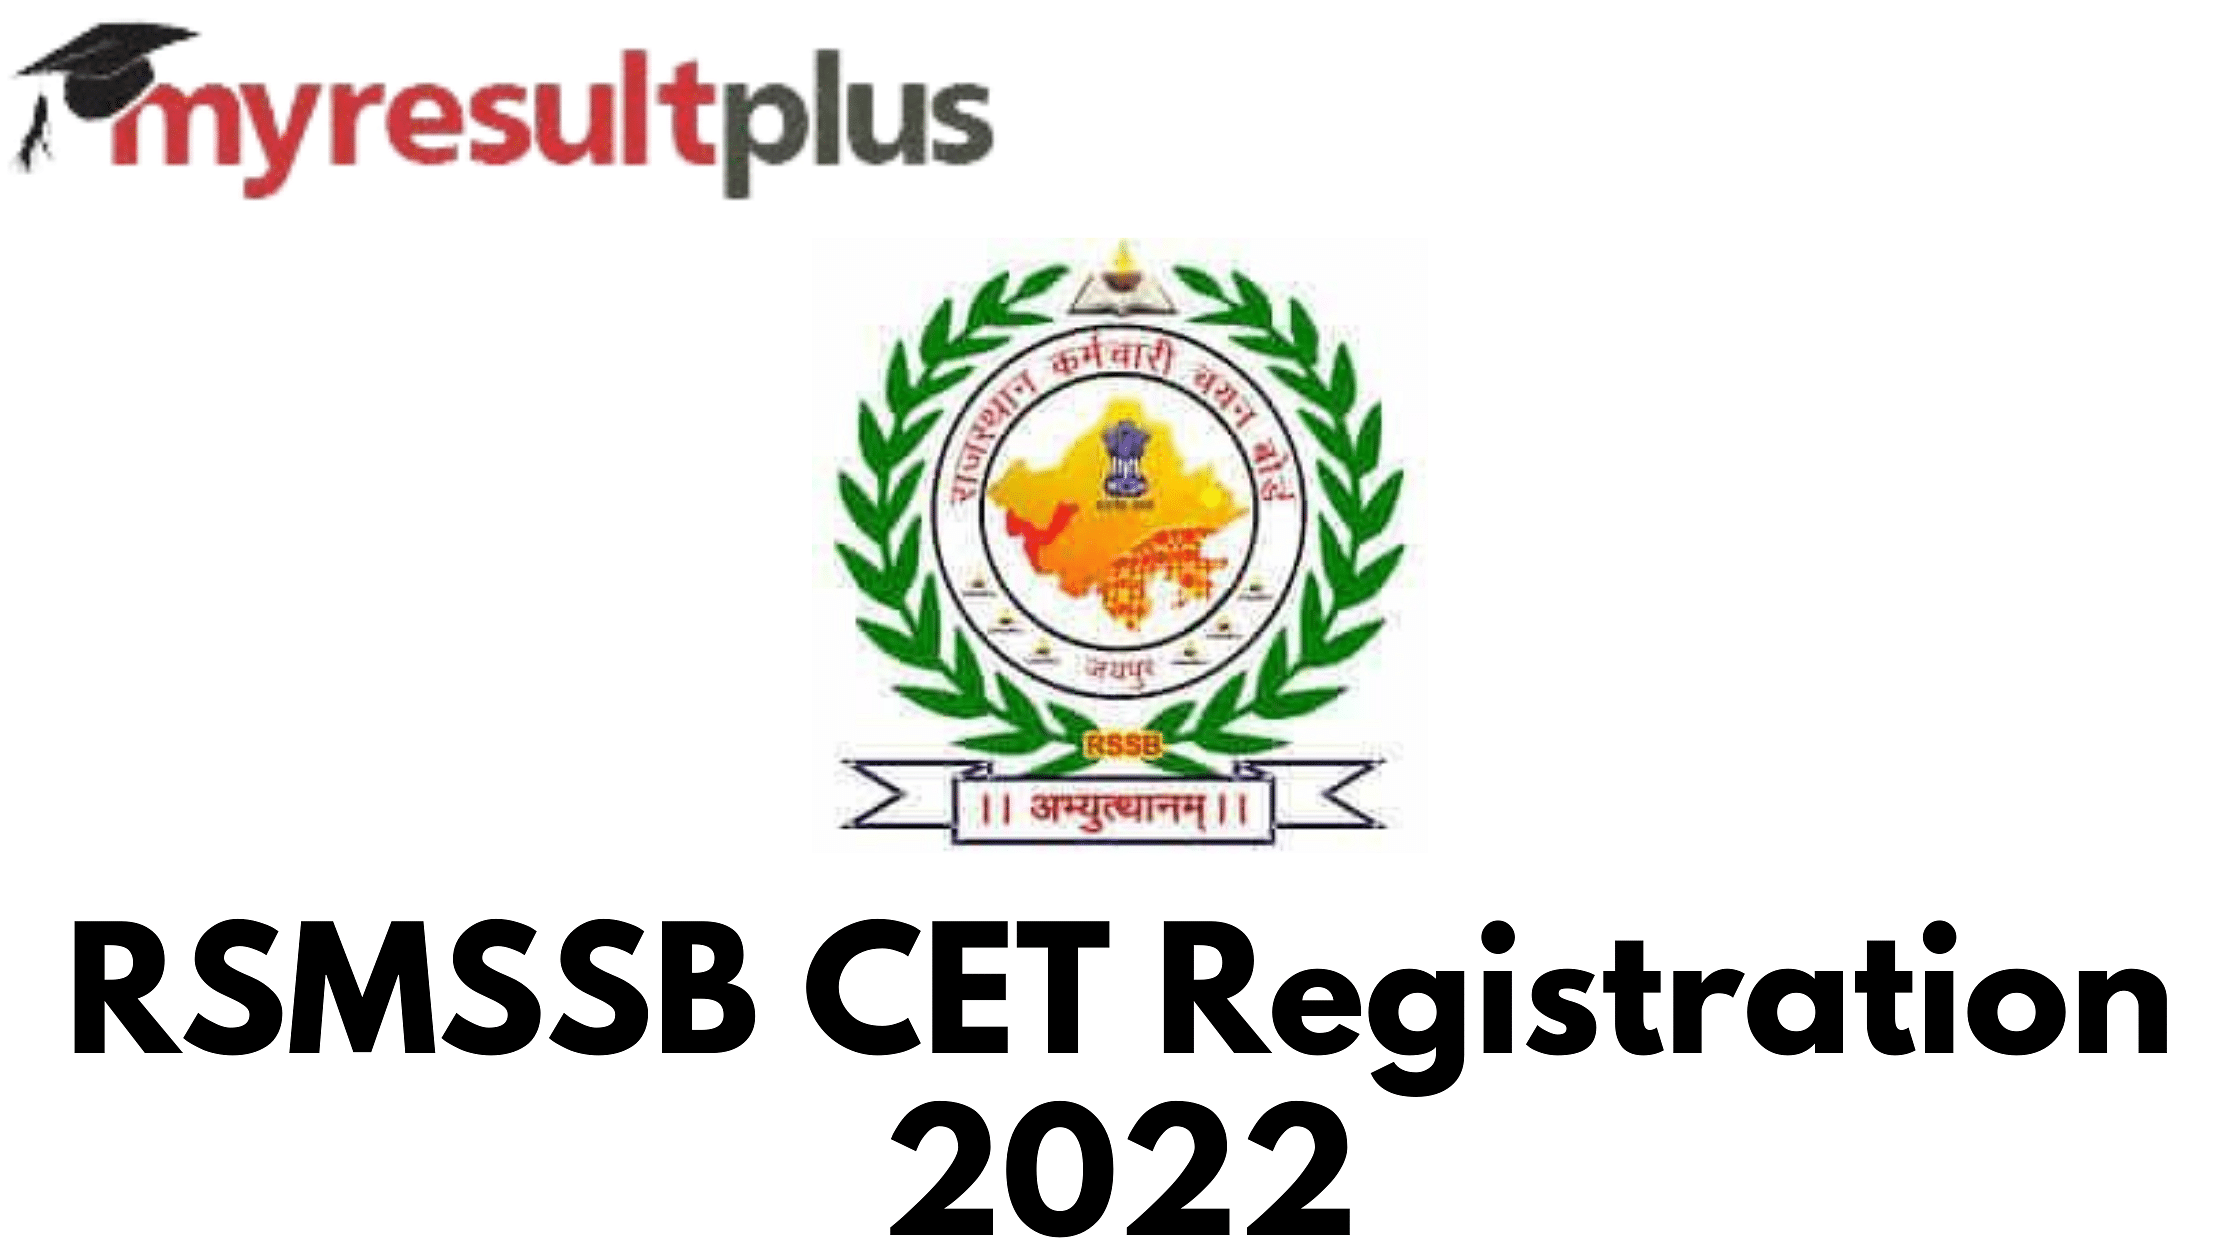 RSMSSB CET 2022: Registration Window to Open Soon, Steps to Apply Here